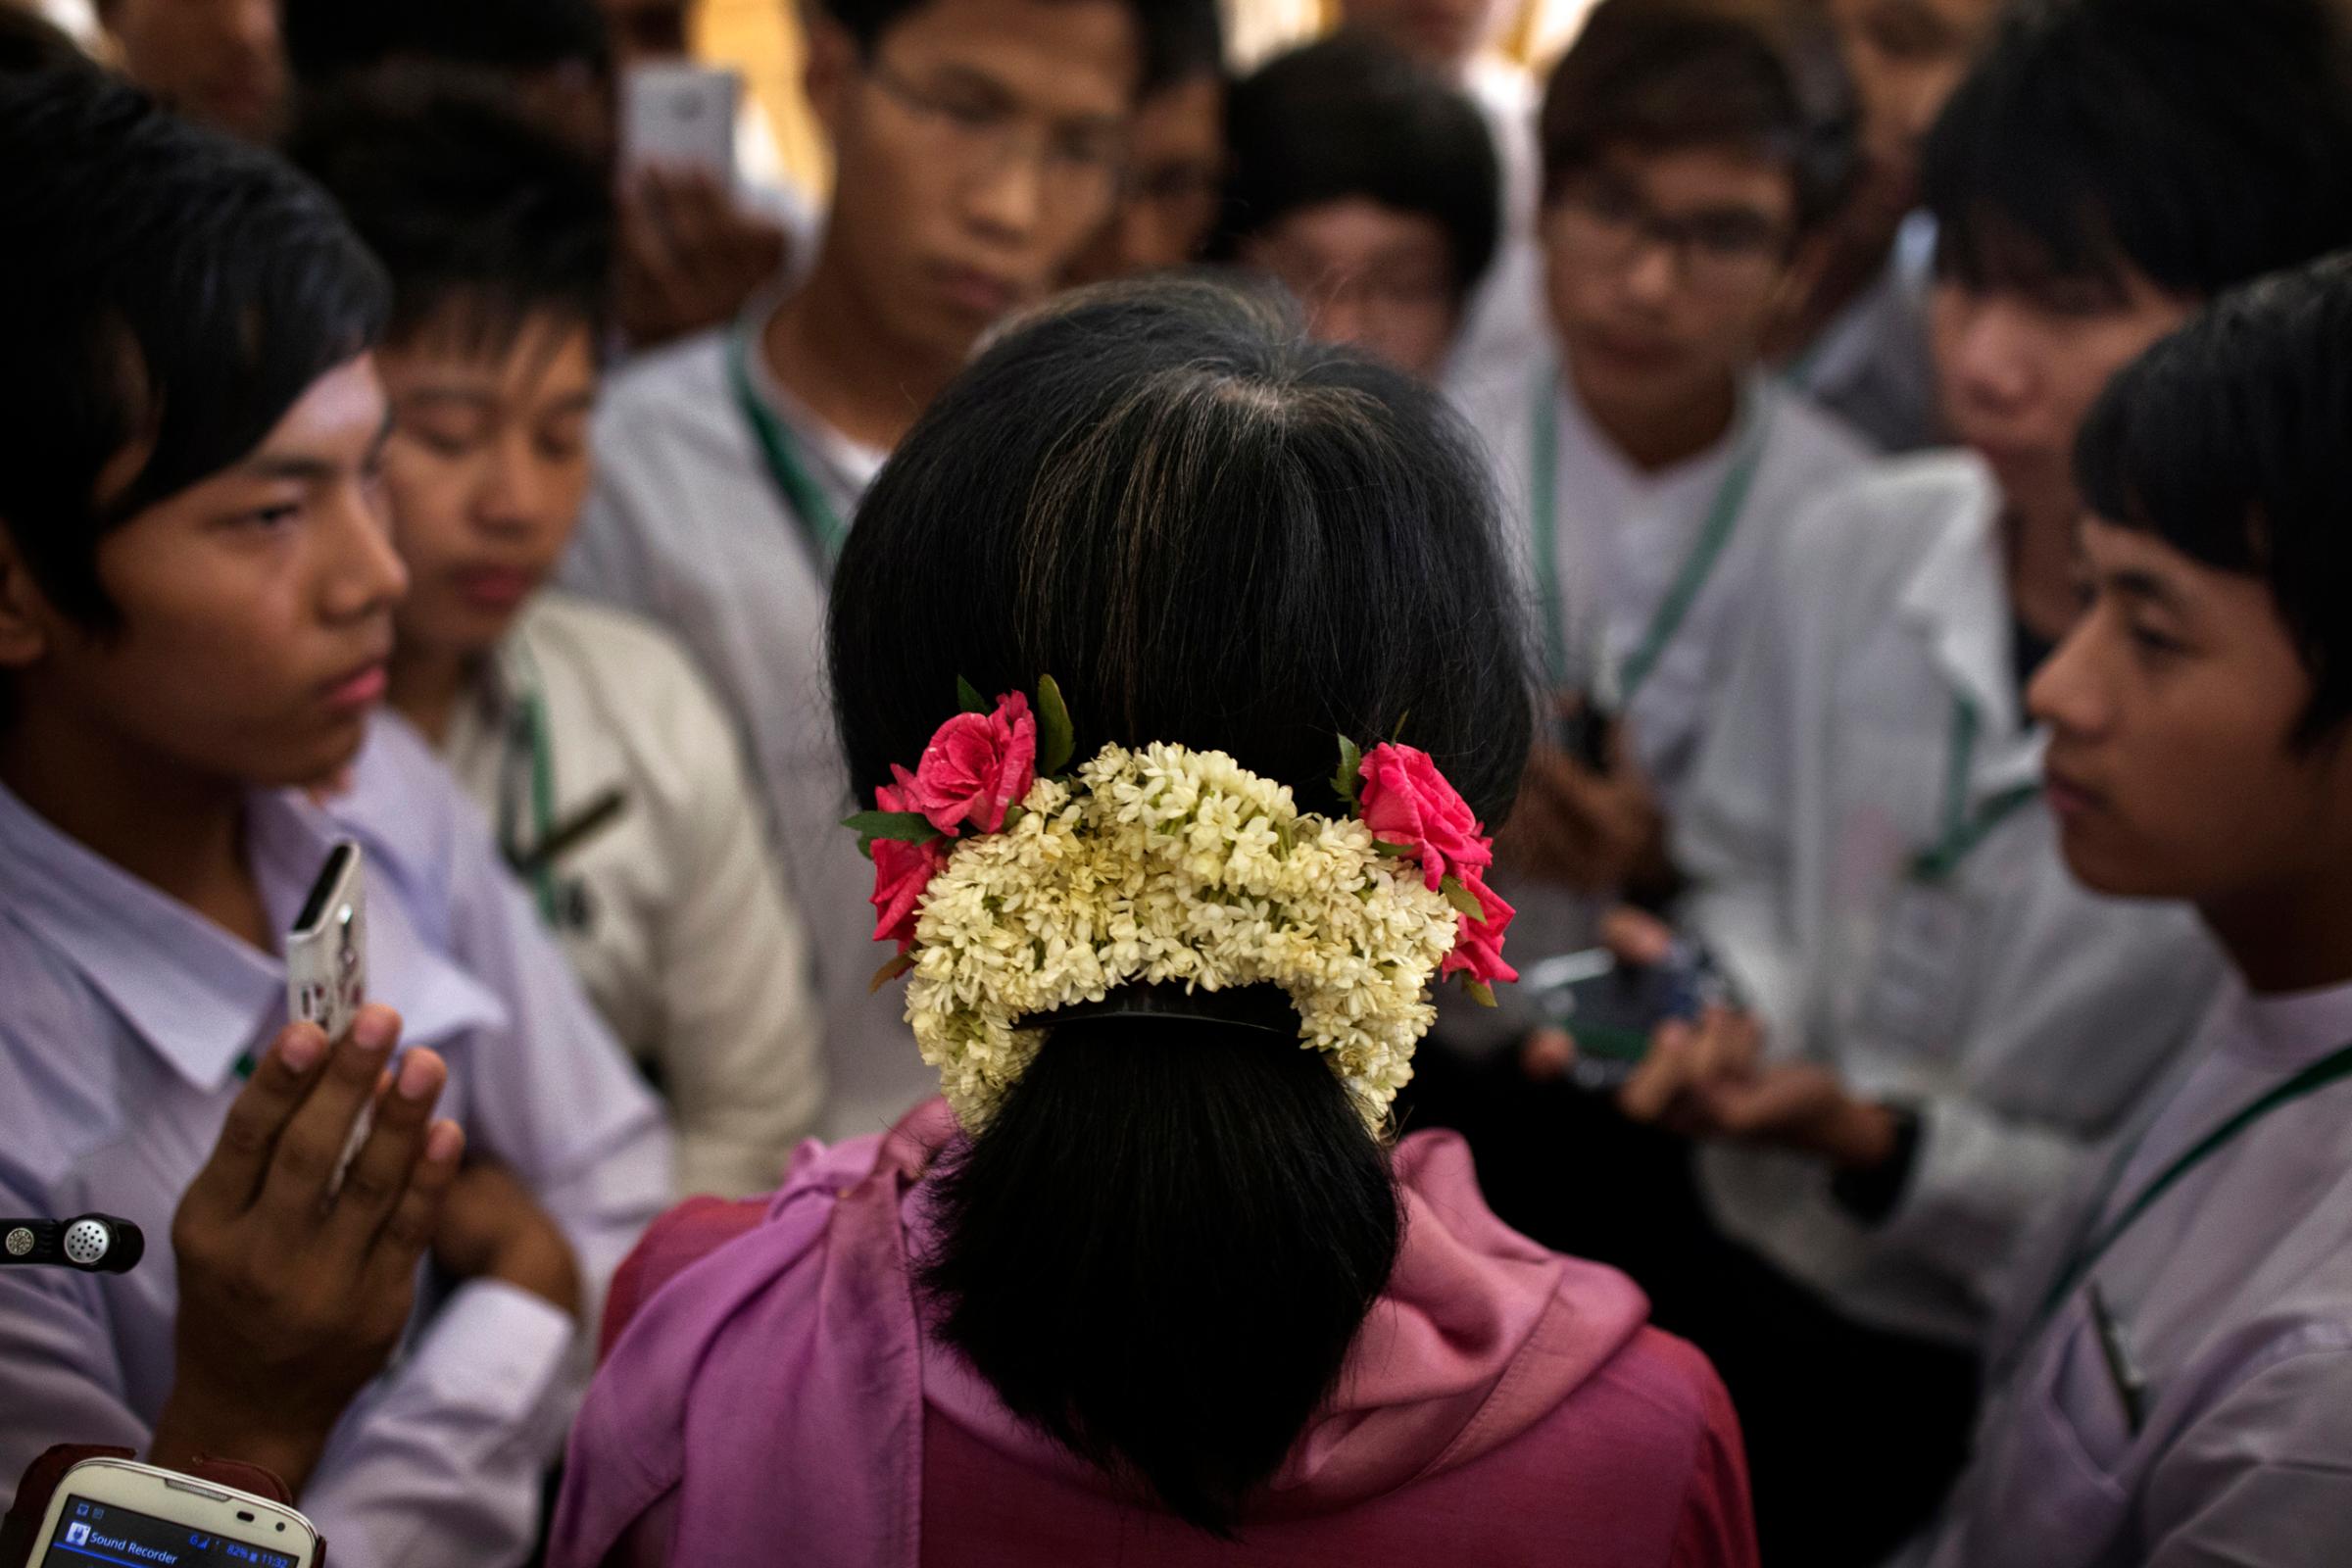 Aung San Suu Kyi talks to visiting students from Meiktila , during a break in a parliamentary session in Naypyidaw, June 20th, 2014.